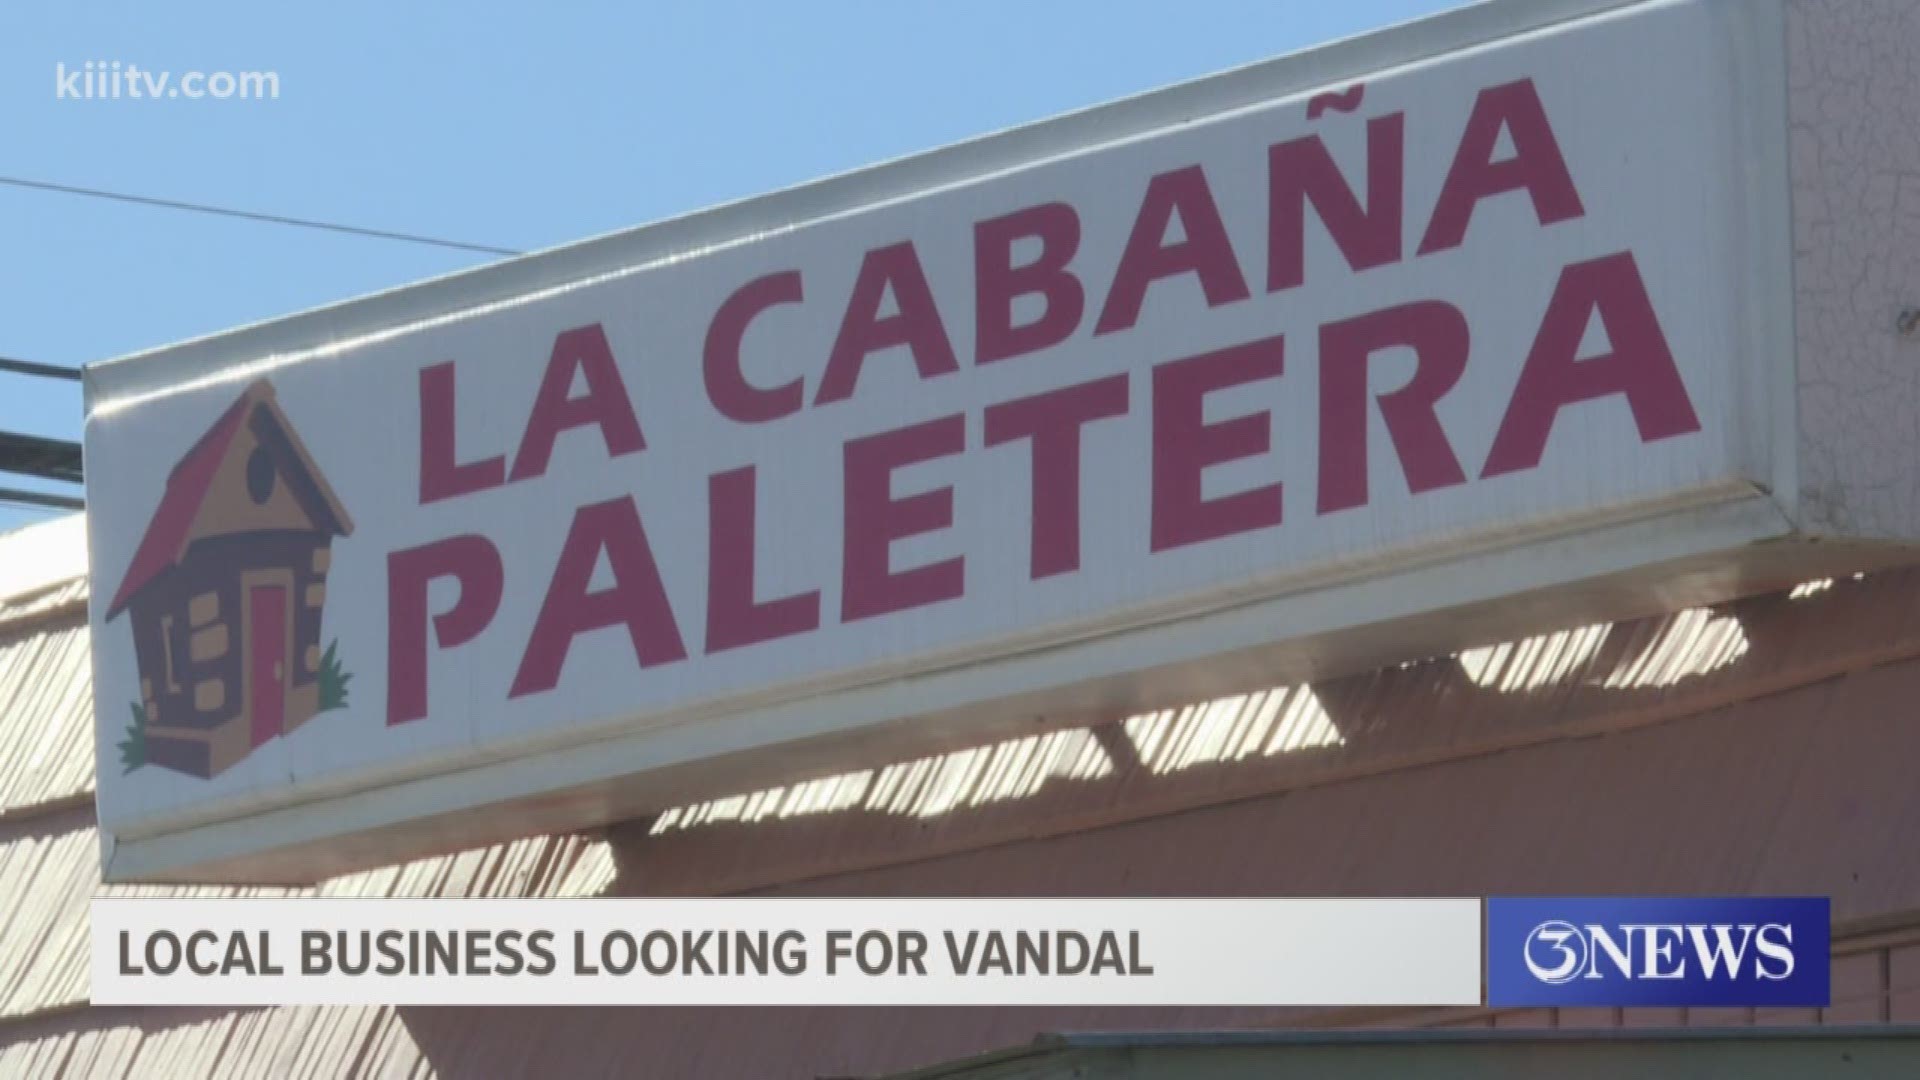 The business owner says sometime on Friday night, an air conditioning unit was stolen from Paletera La Cabaña off of Leopard Street.